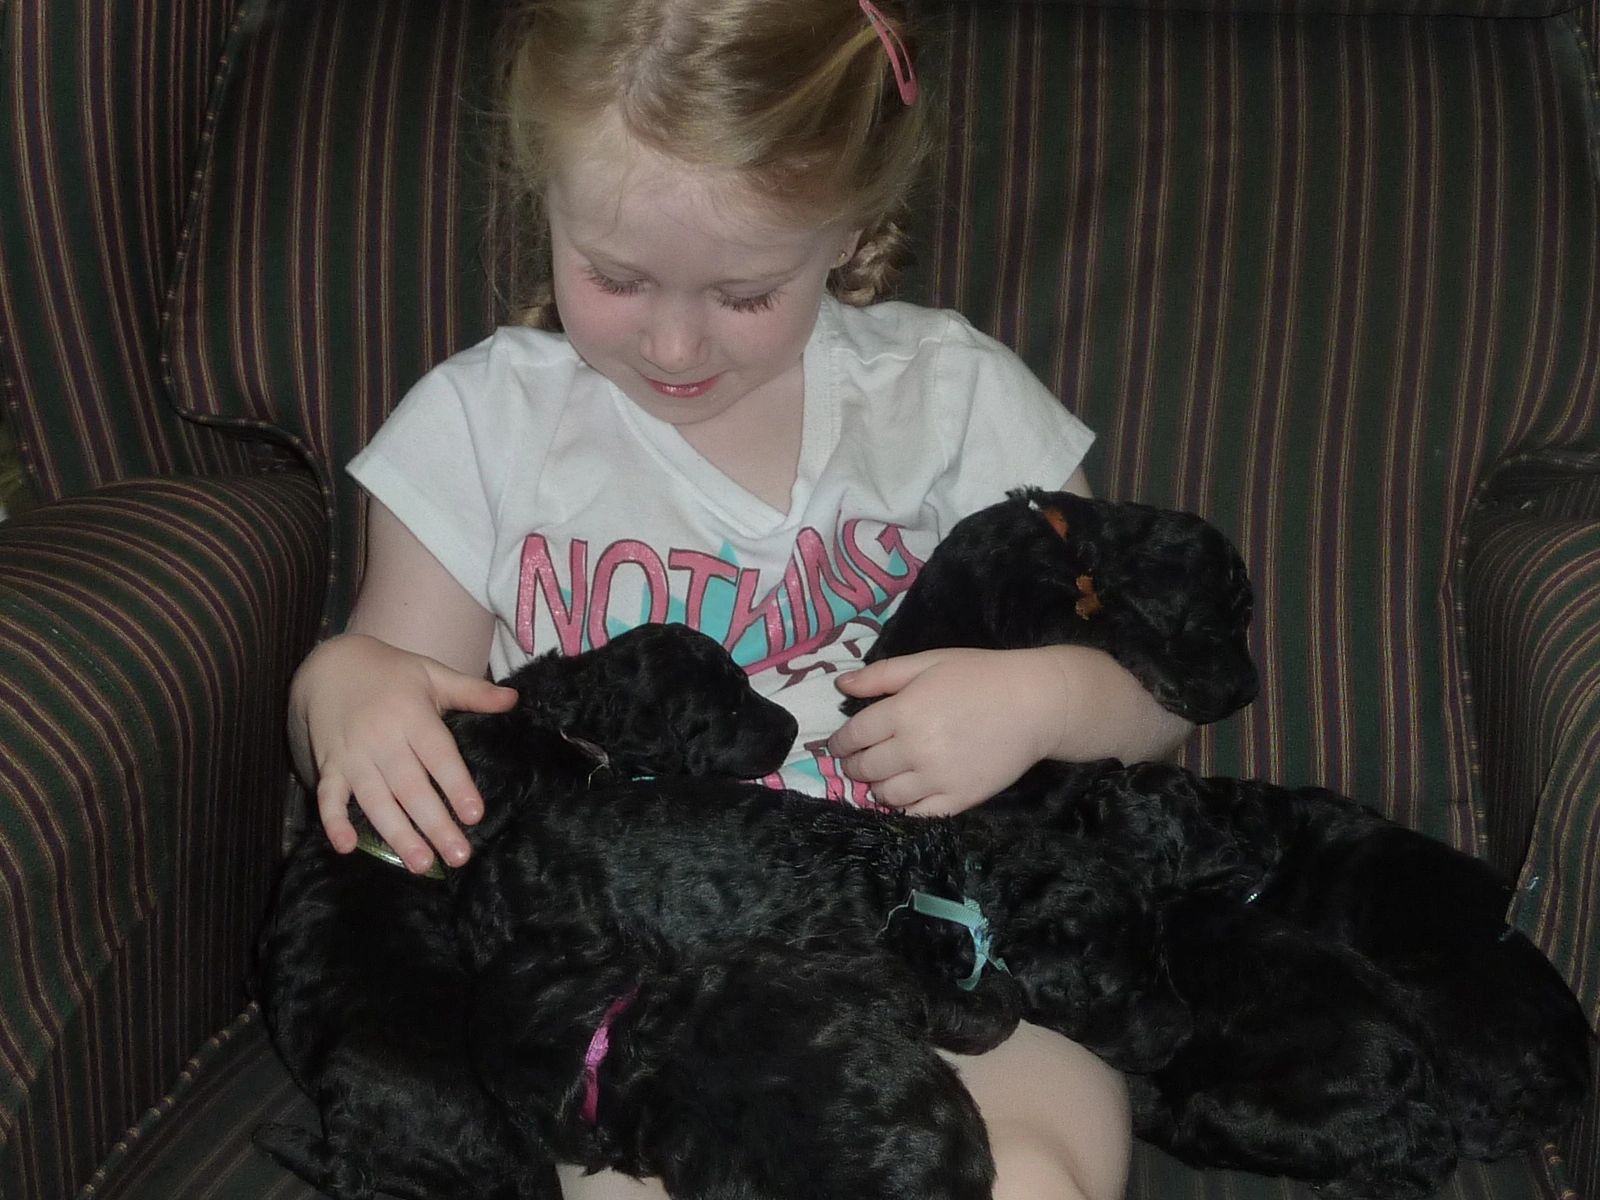 Kids and puppies just belong together. Silver Standard Poodles, Silver Standard Poodle Puppies, Silver Standard Poodle Puppies for Sale, Silver Puppies for Sale, Standard Poodles For Sale, Silver Standard Poodle Puppies for sale, poodles for sale, Stately Standard Poodles, Silver Standard Poodle Puppies for sale, Silver Standard Poodles. Silver Standard poodles 